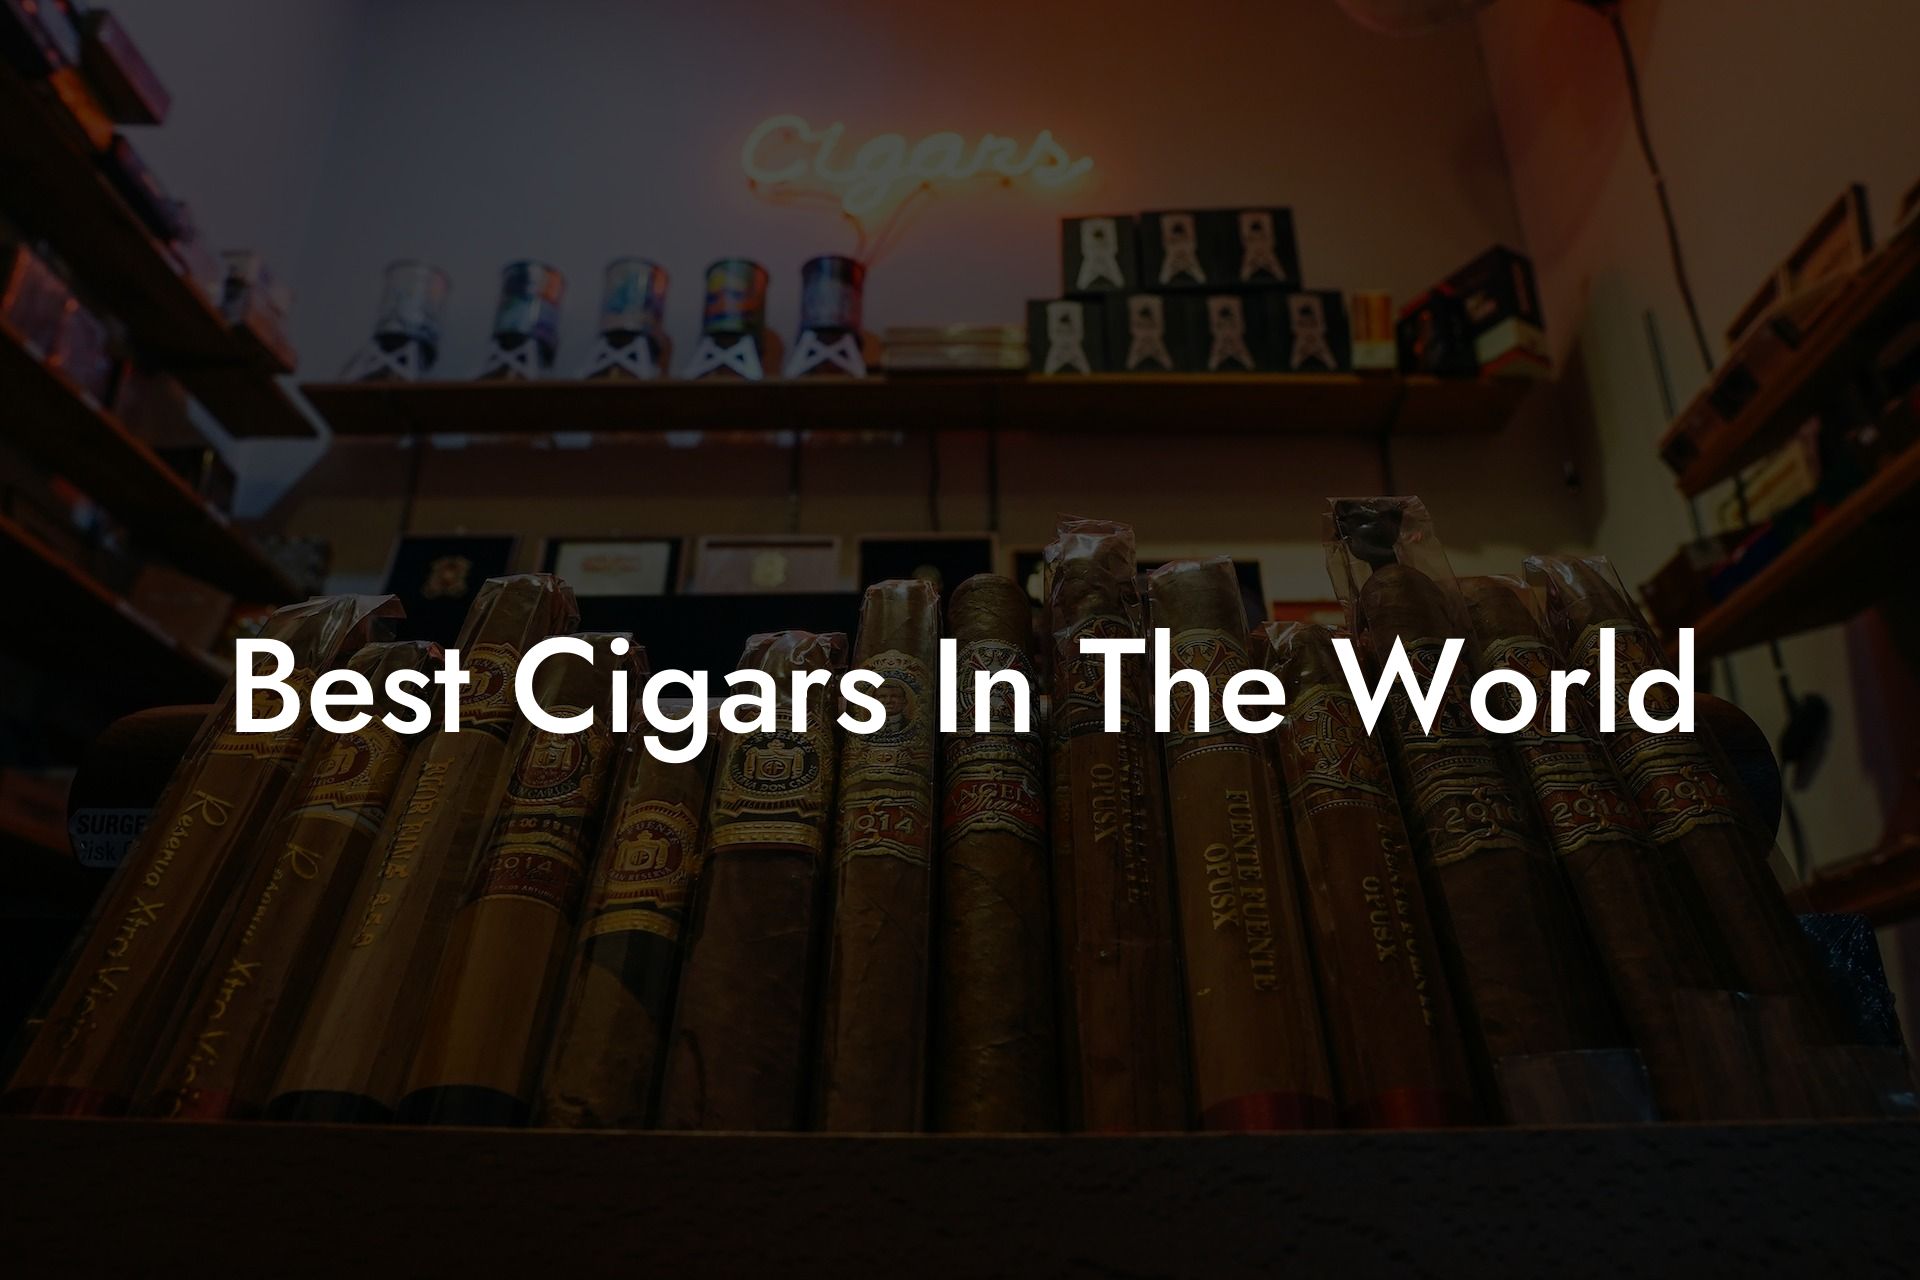 Best Cigars In The World